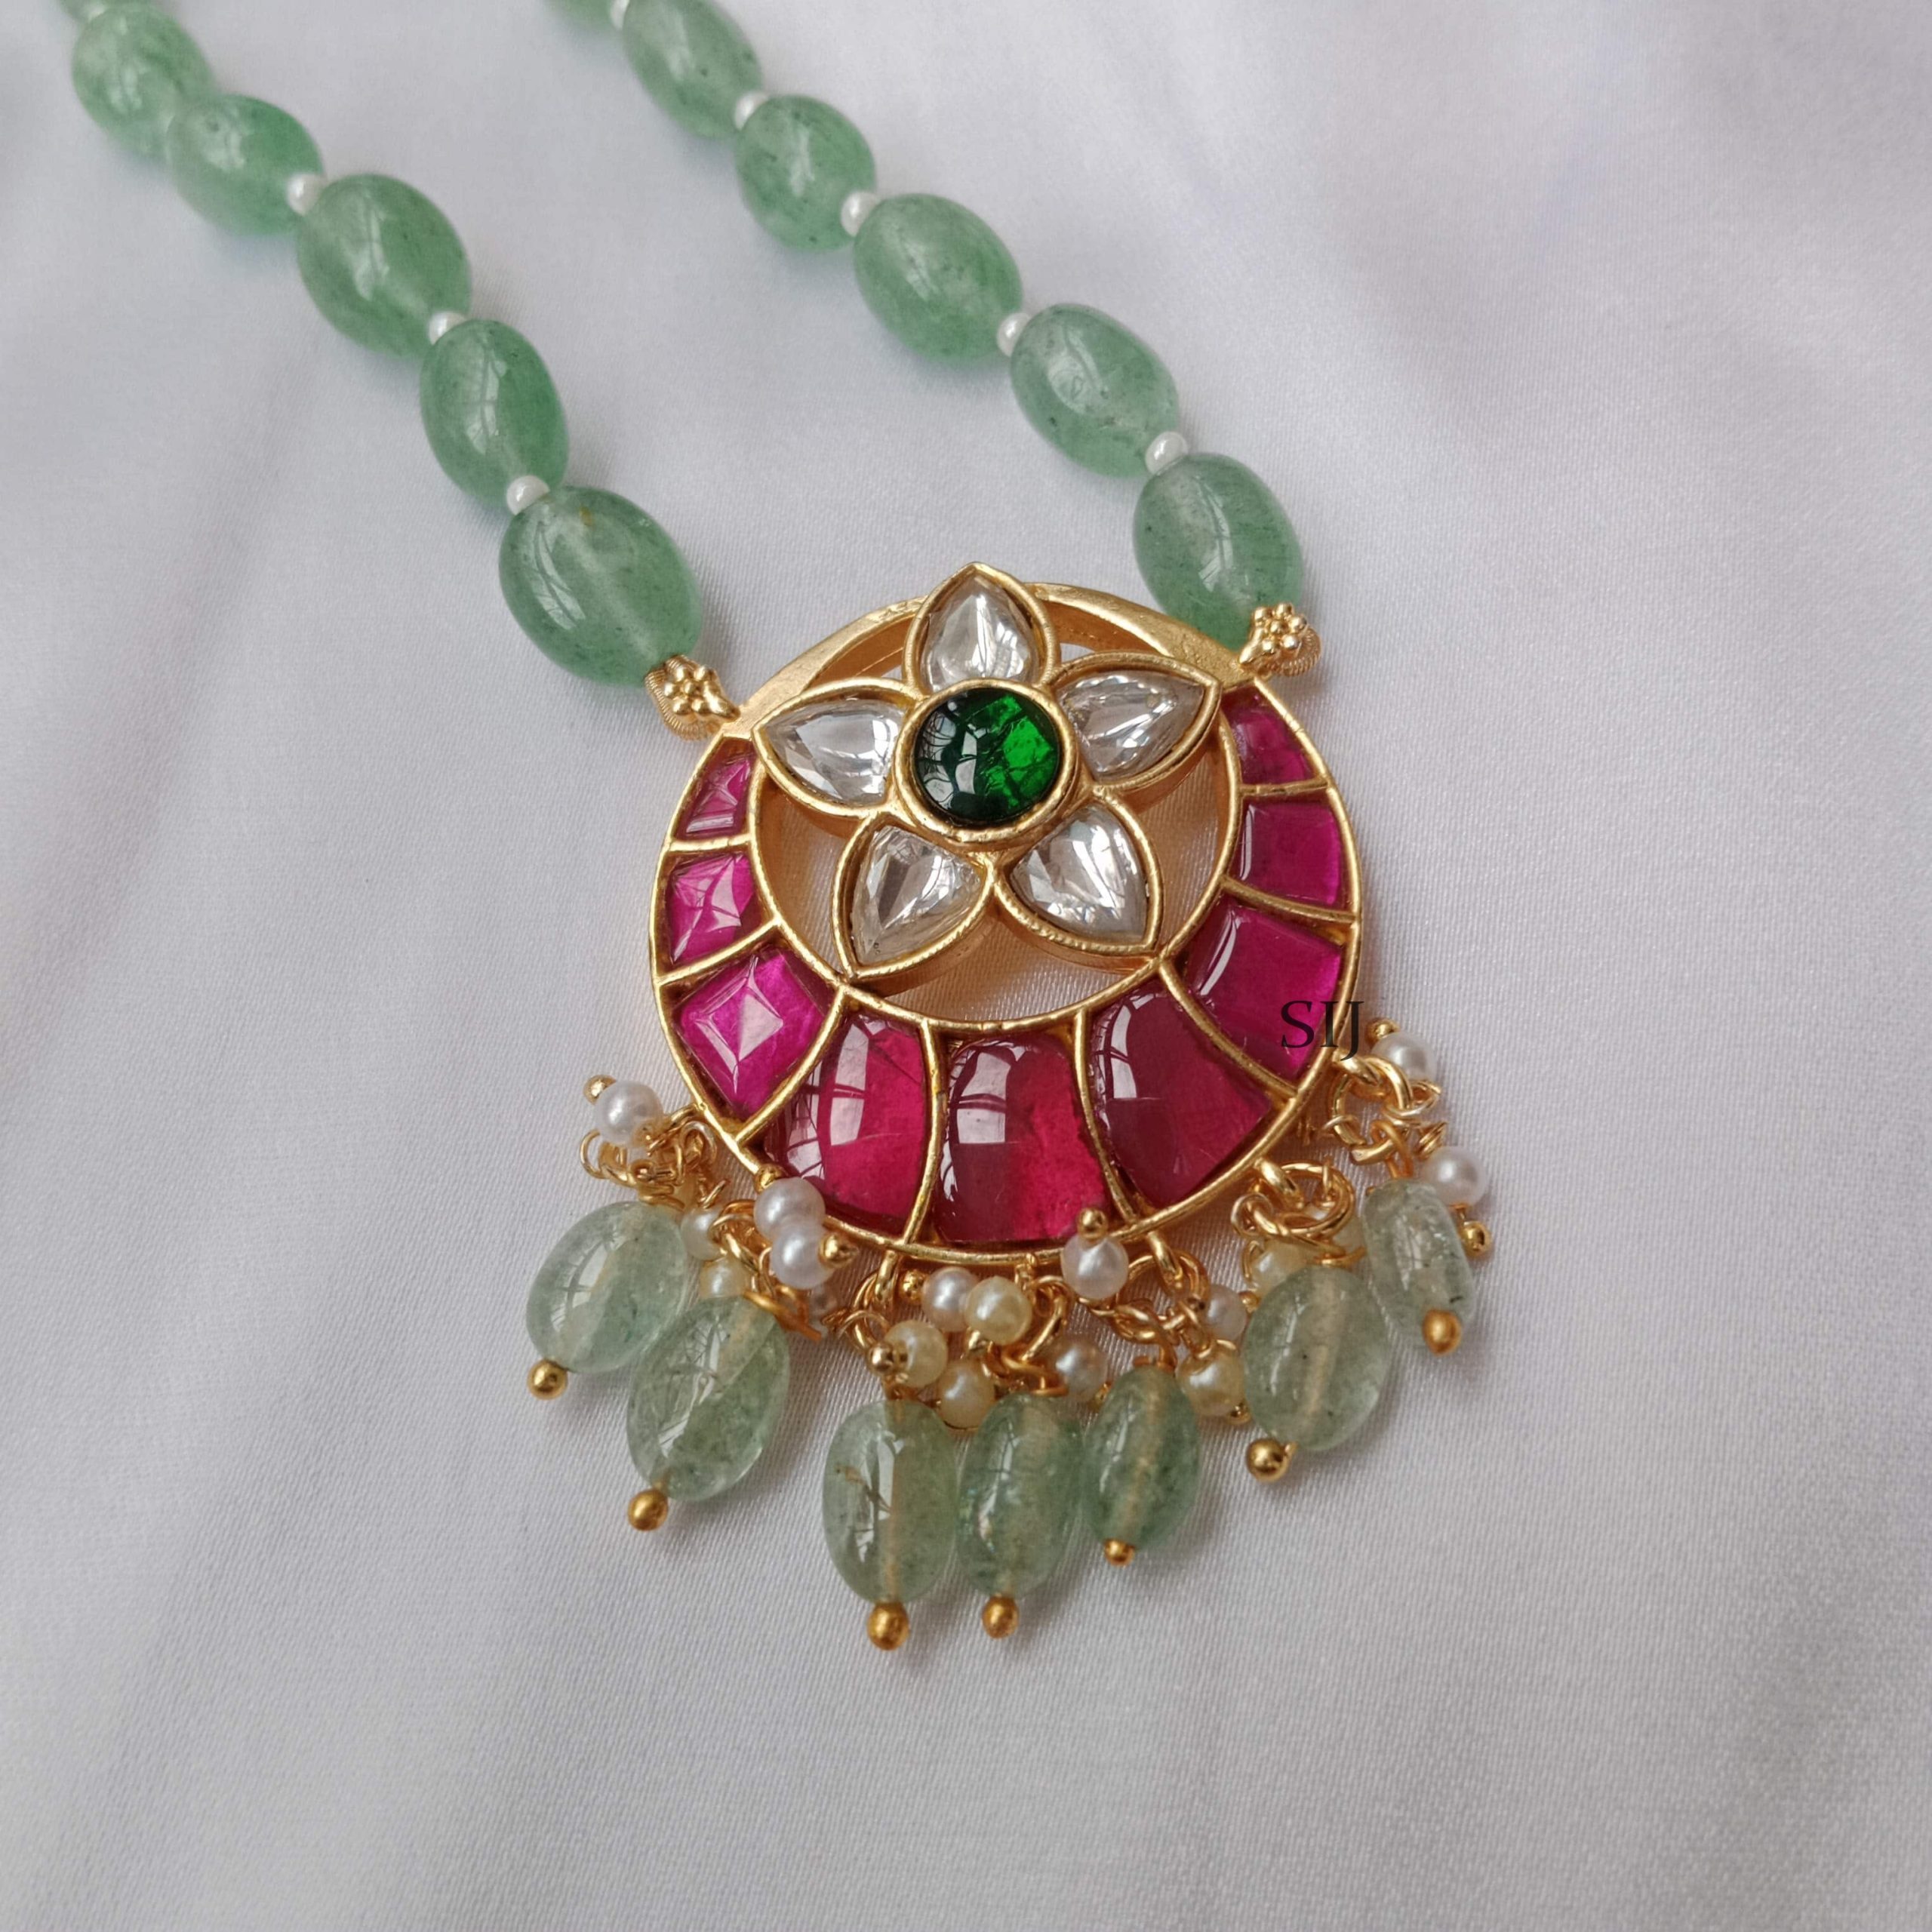 Green Beads Necklace with Jadau Moon Pendant